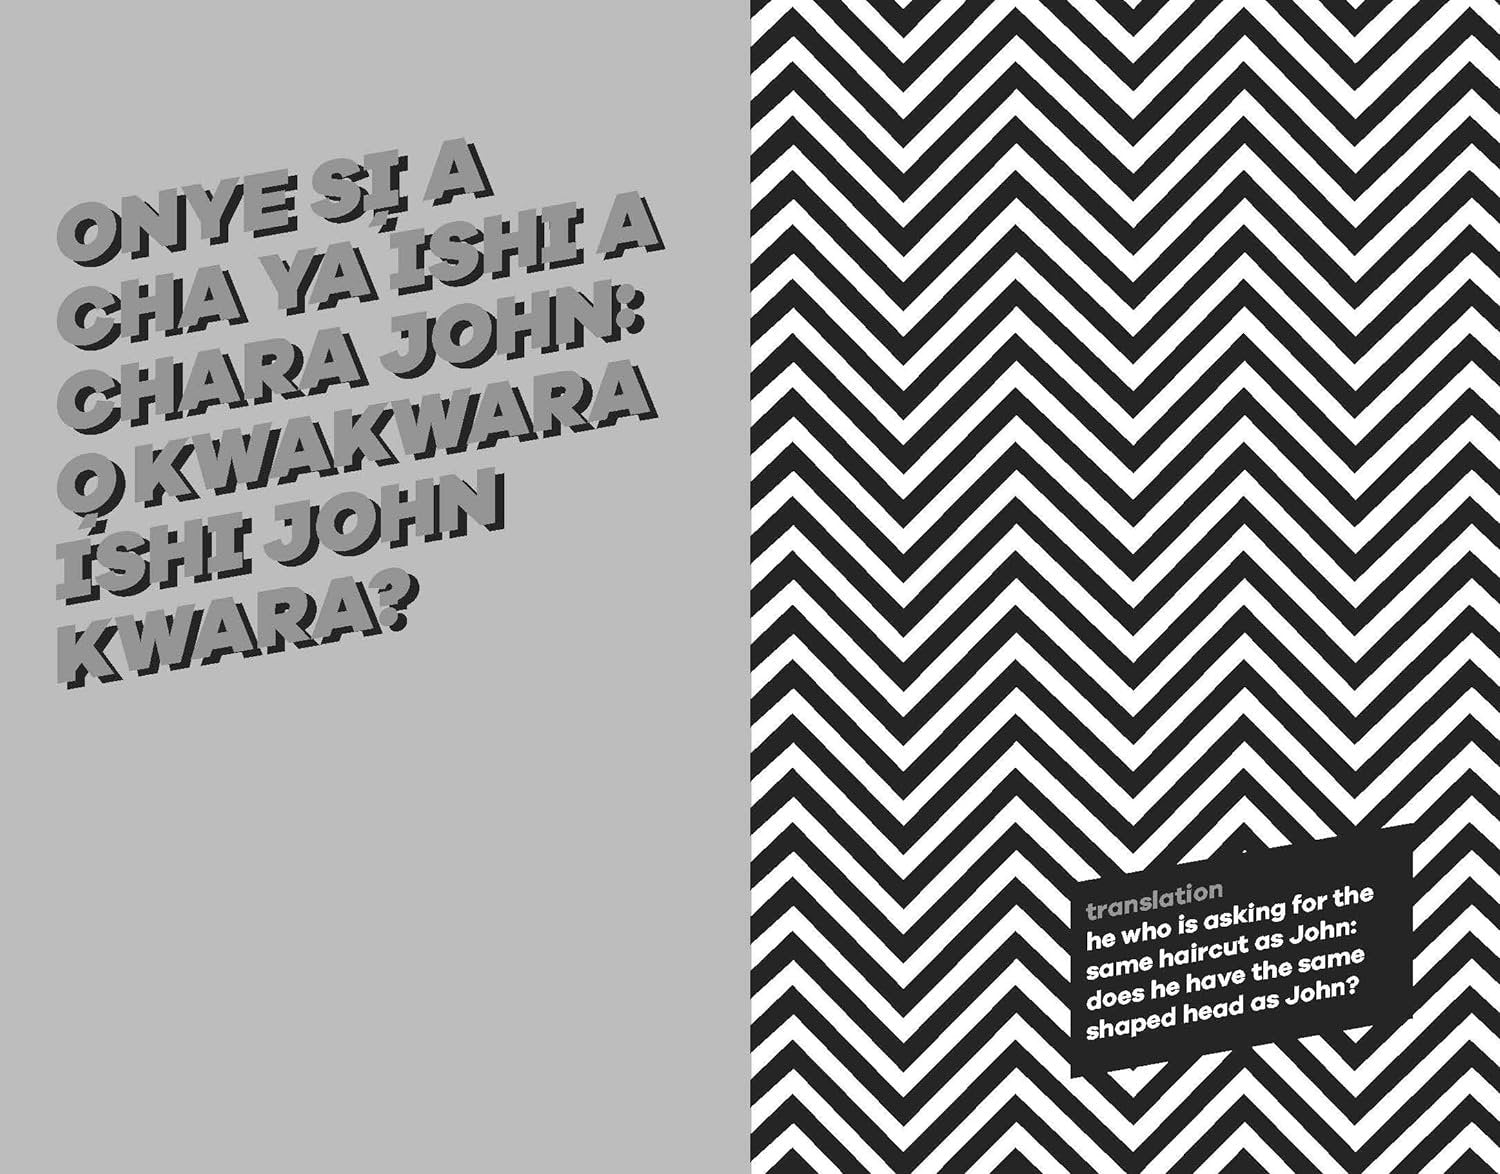 A graphic design featuring a black and white zigzag pattern with a gray inset box containing untranslated text from "What a Time to Journal: Work Out Why You Are Already Enough," alongside a translation in a black speech bubble by Chidera Eggerue.